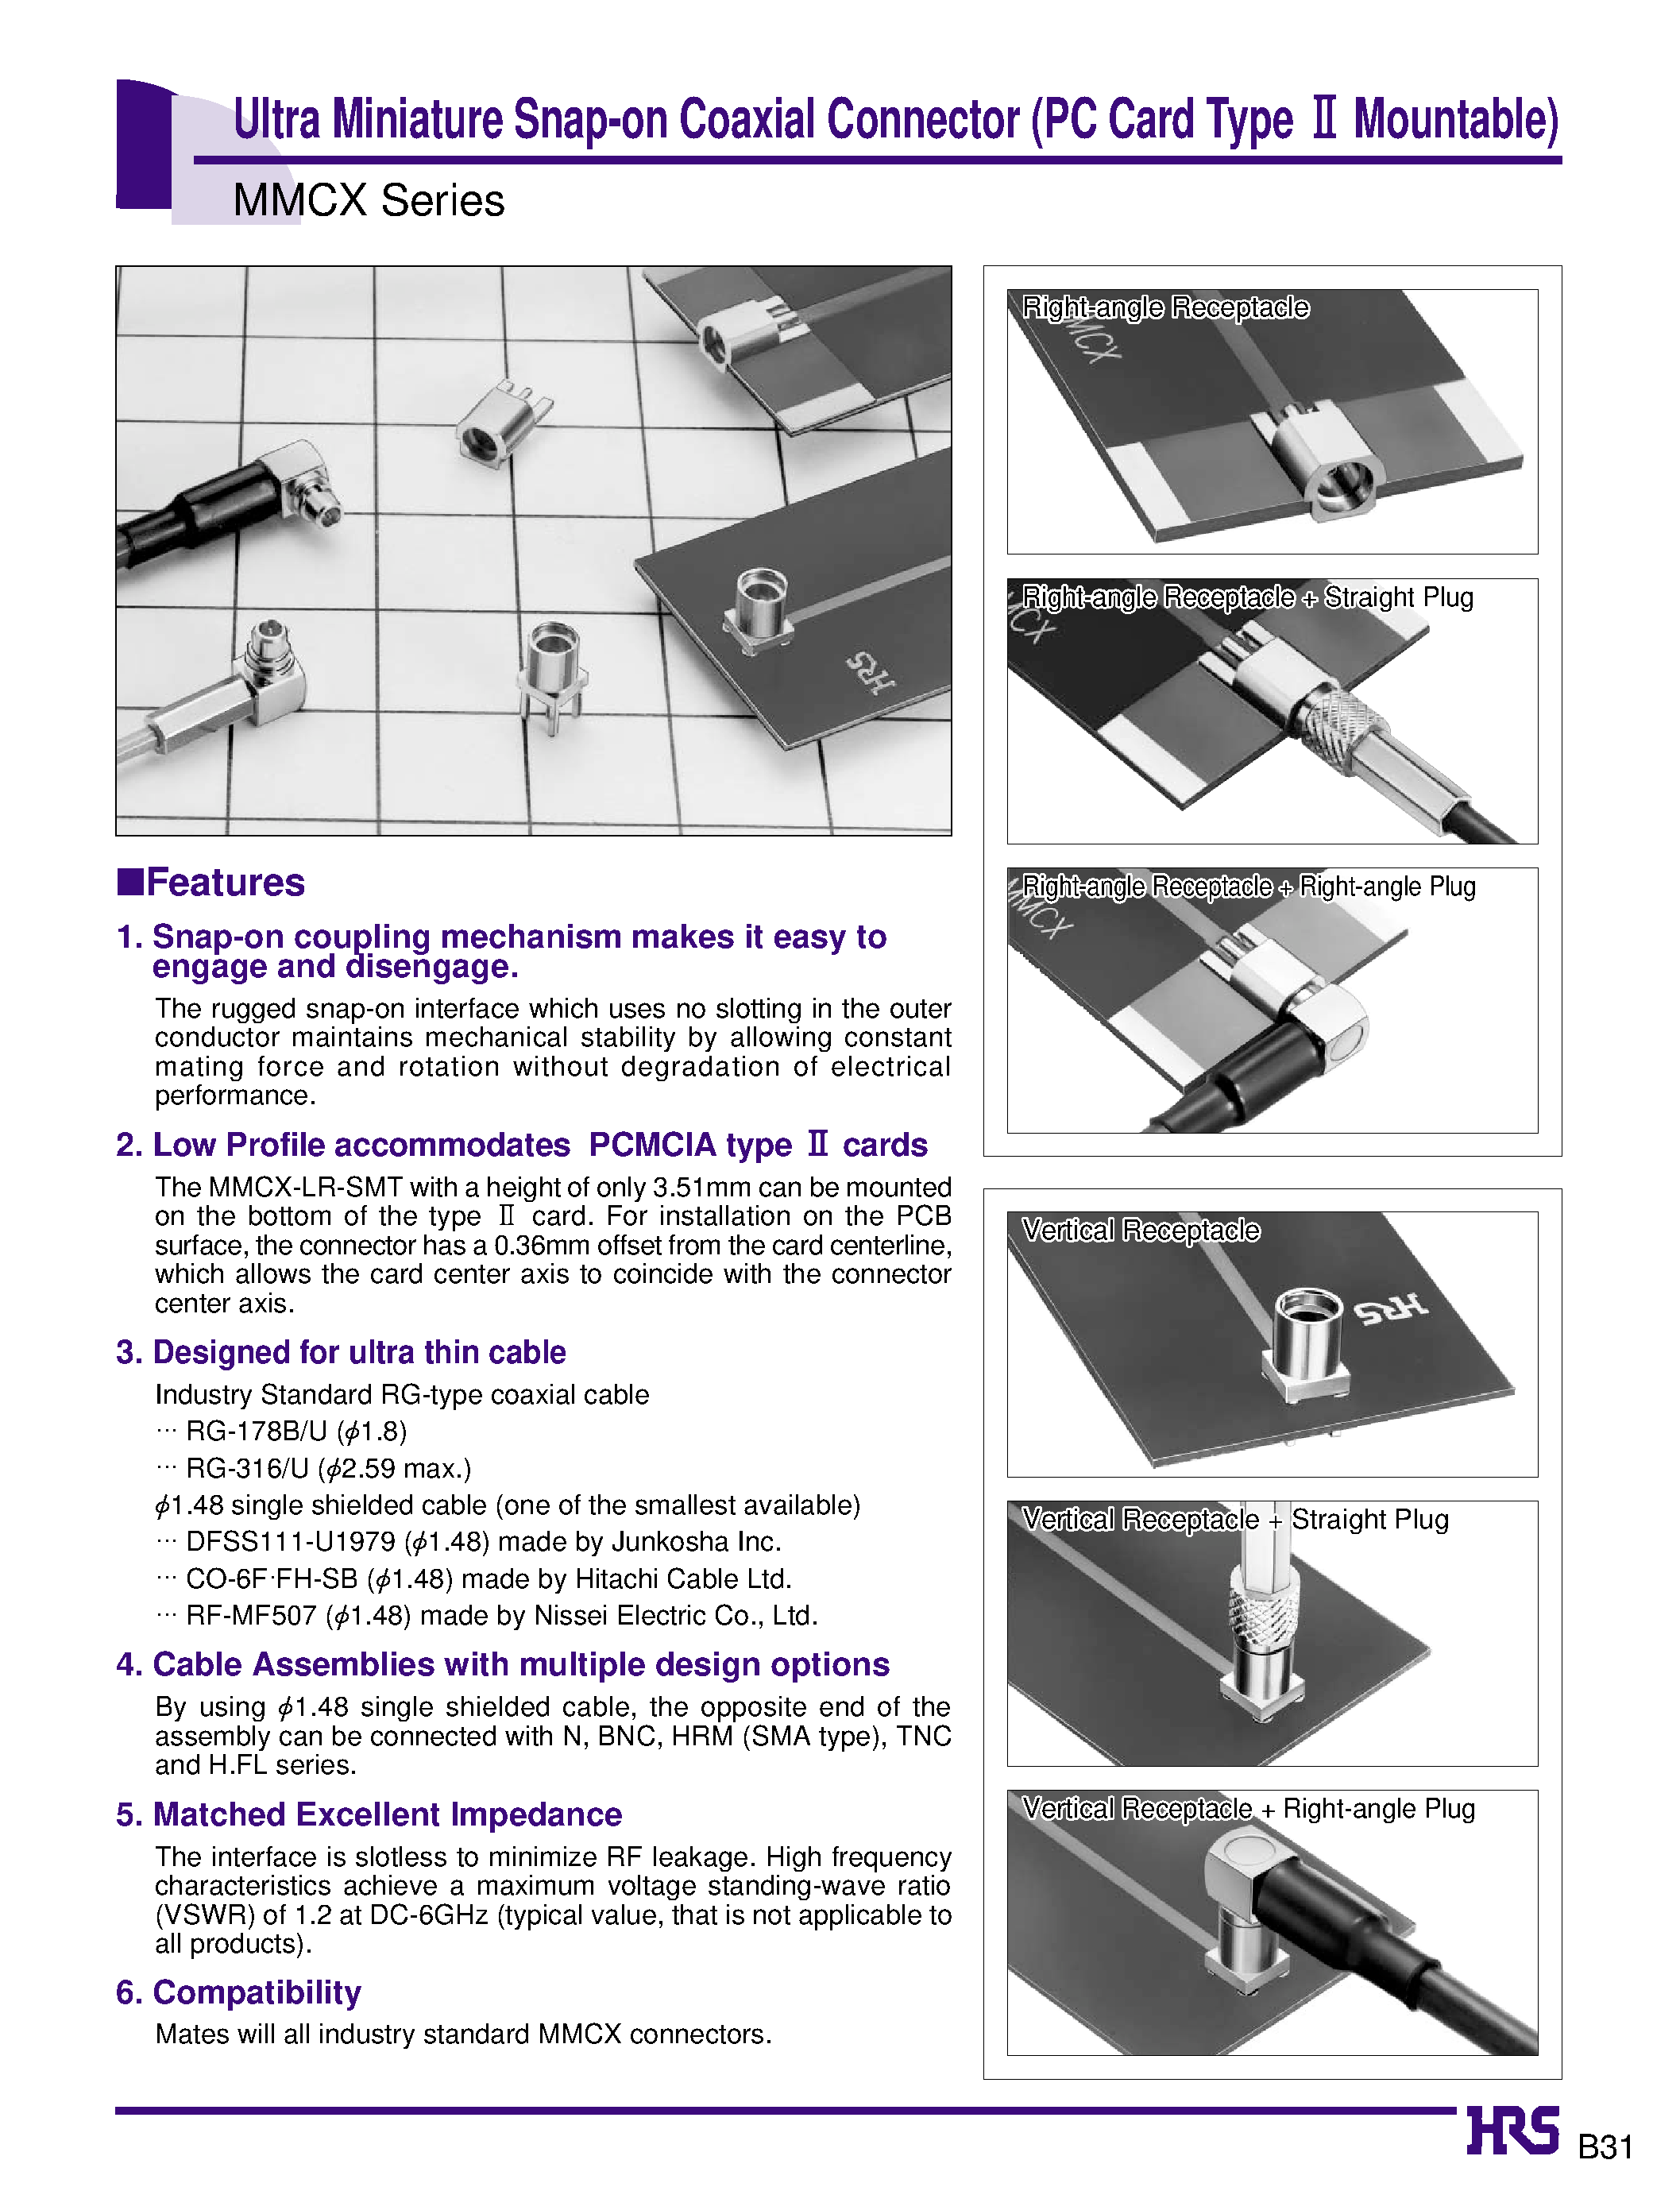 Datasheet MMCX-J-316/U - Ultra Miniature Snap-on Coaxial Connector (PC Card Type 2 Mountable) page 1